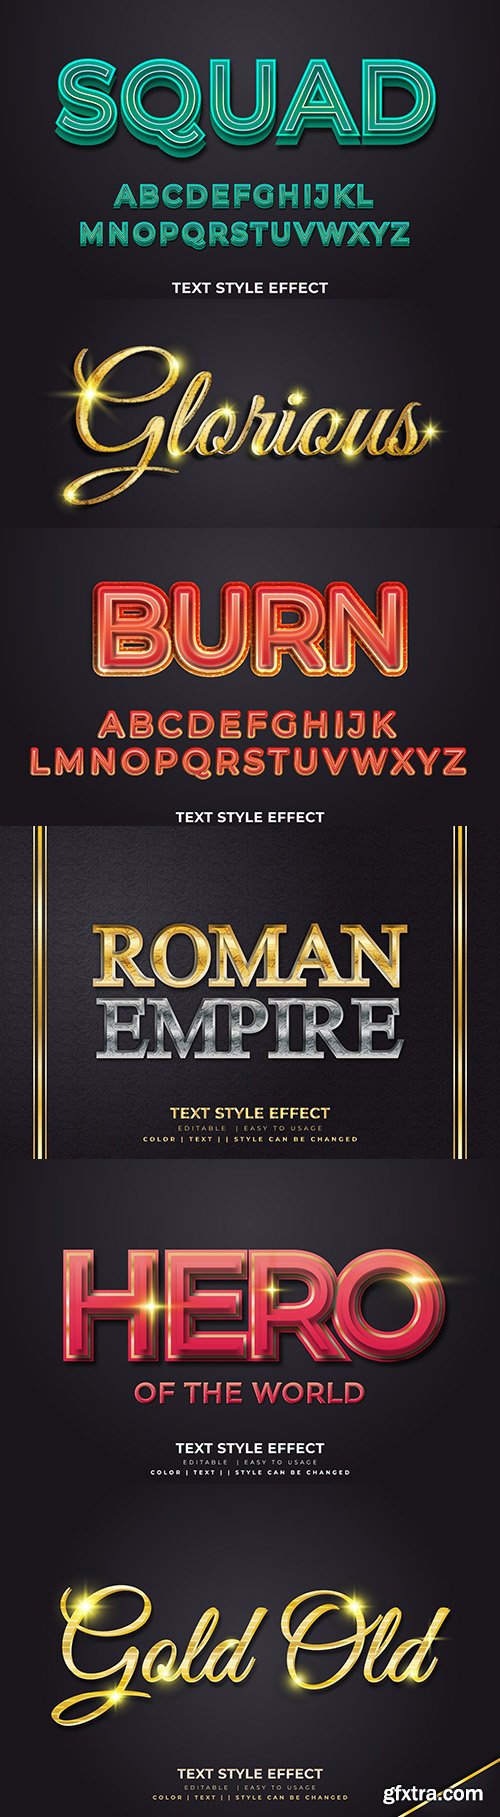 3d text style with gold and texture effect